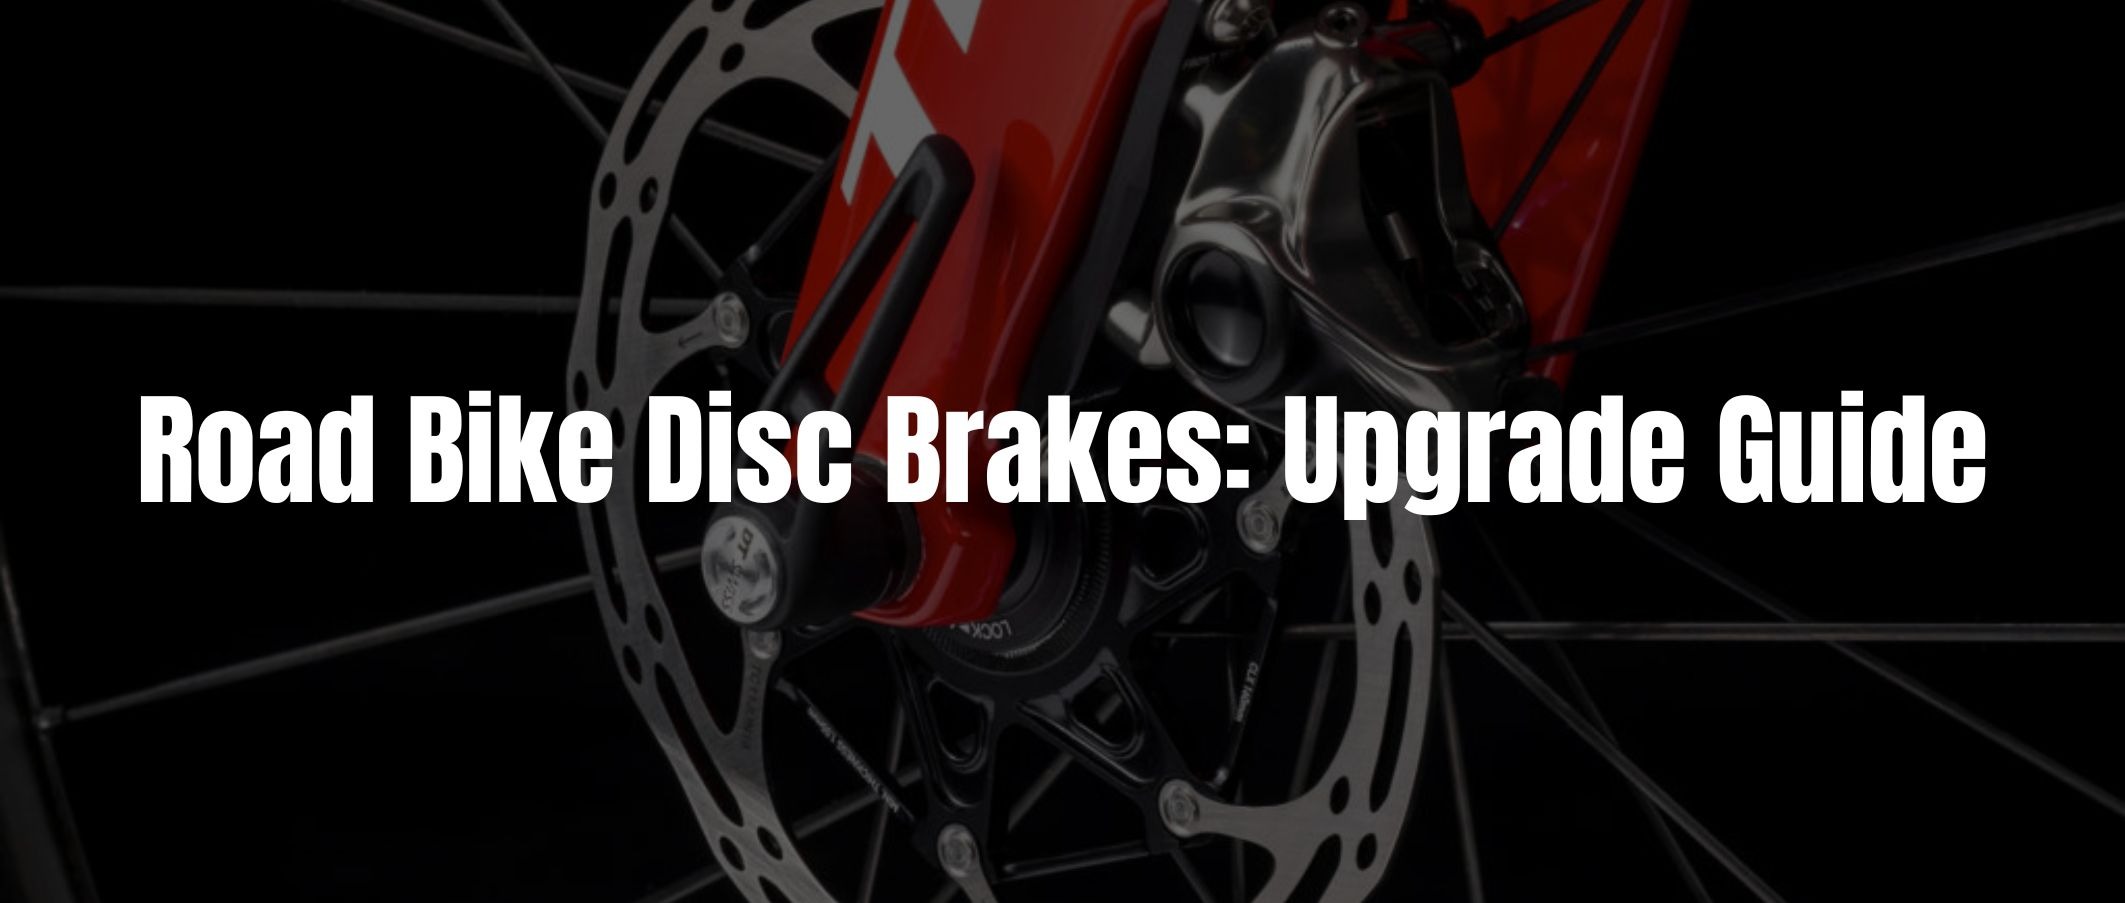 Image of a disc brake. Road Bike Disc Brakes:Upgrade Guide text